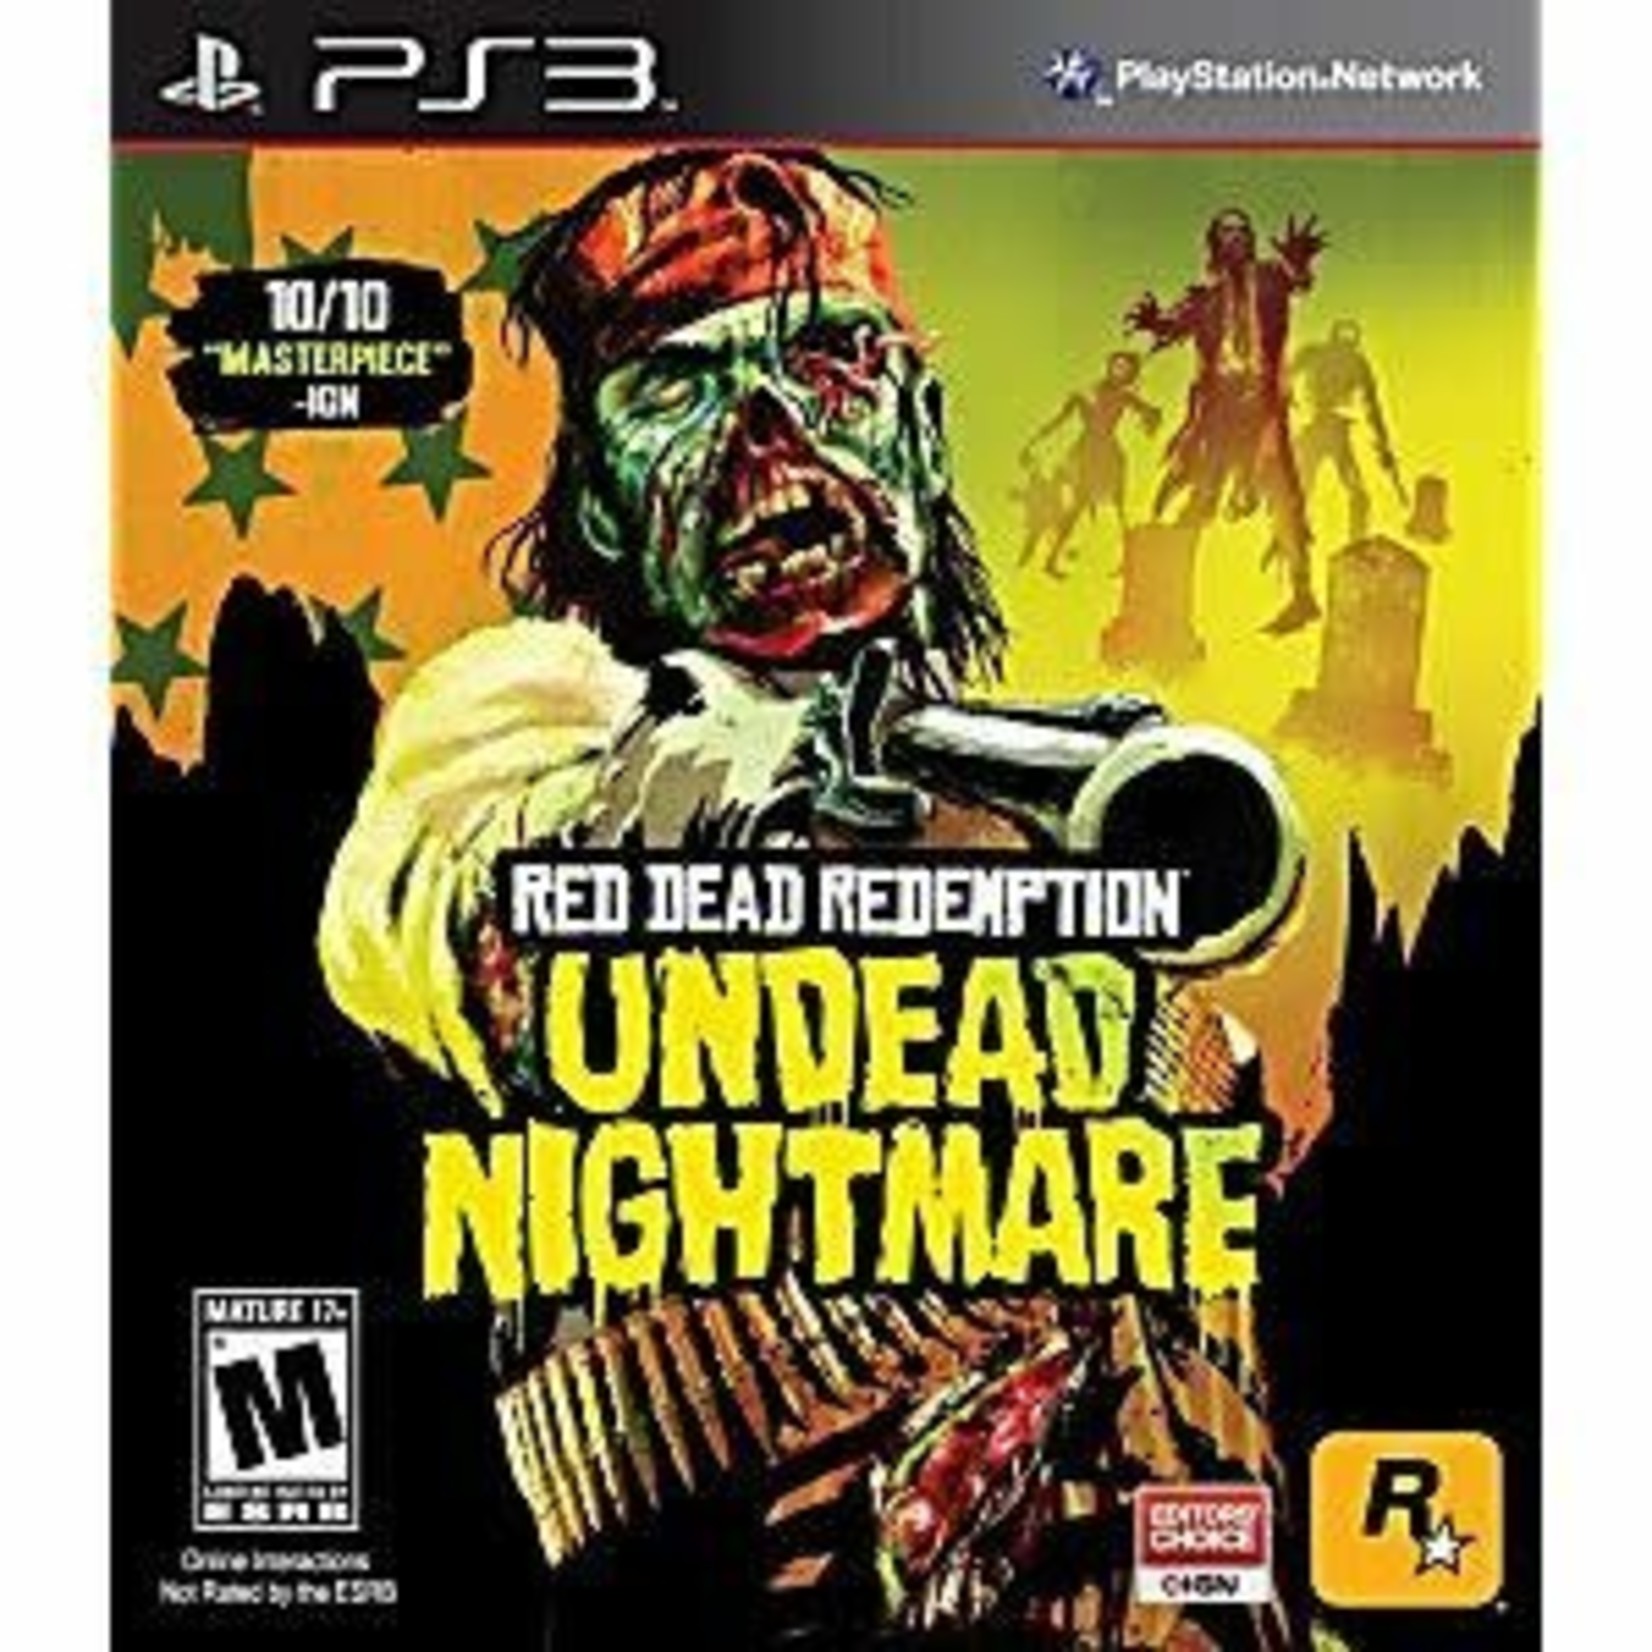 PS3U-RED DEAD REDEMPTION: UNDEAD NIGHTMARE